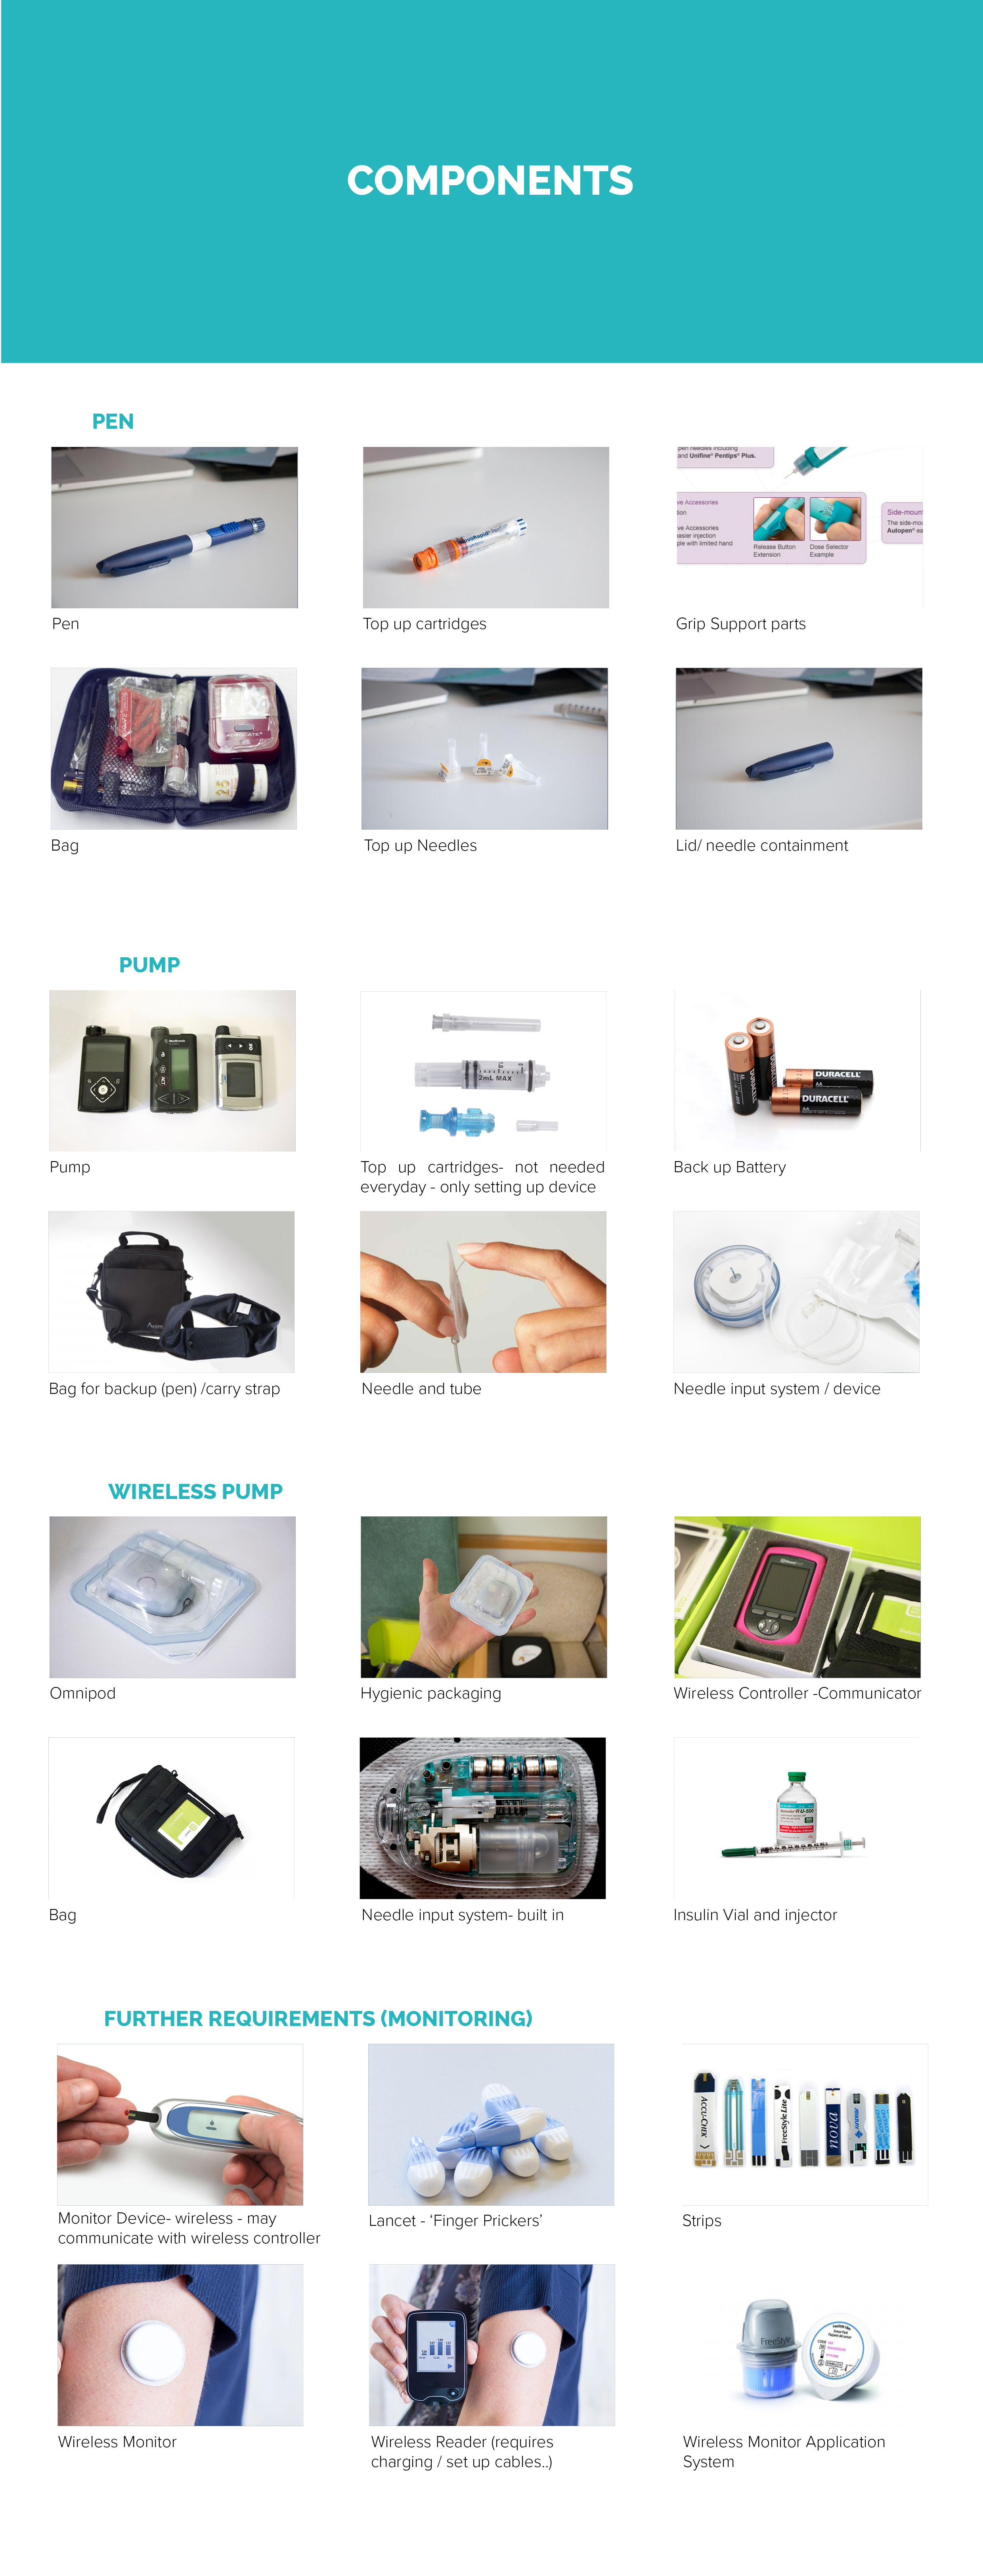 Diabetes products components